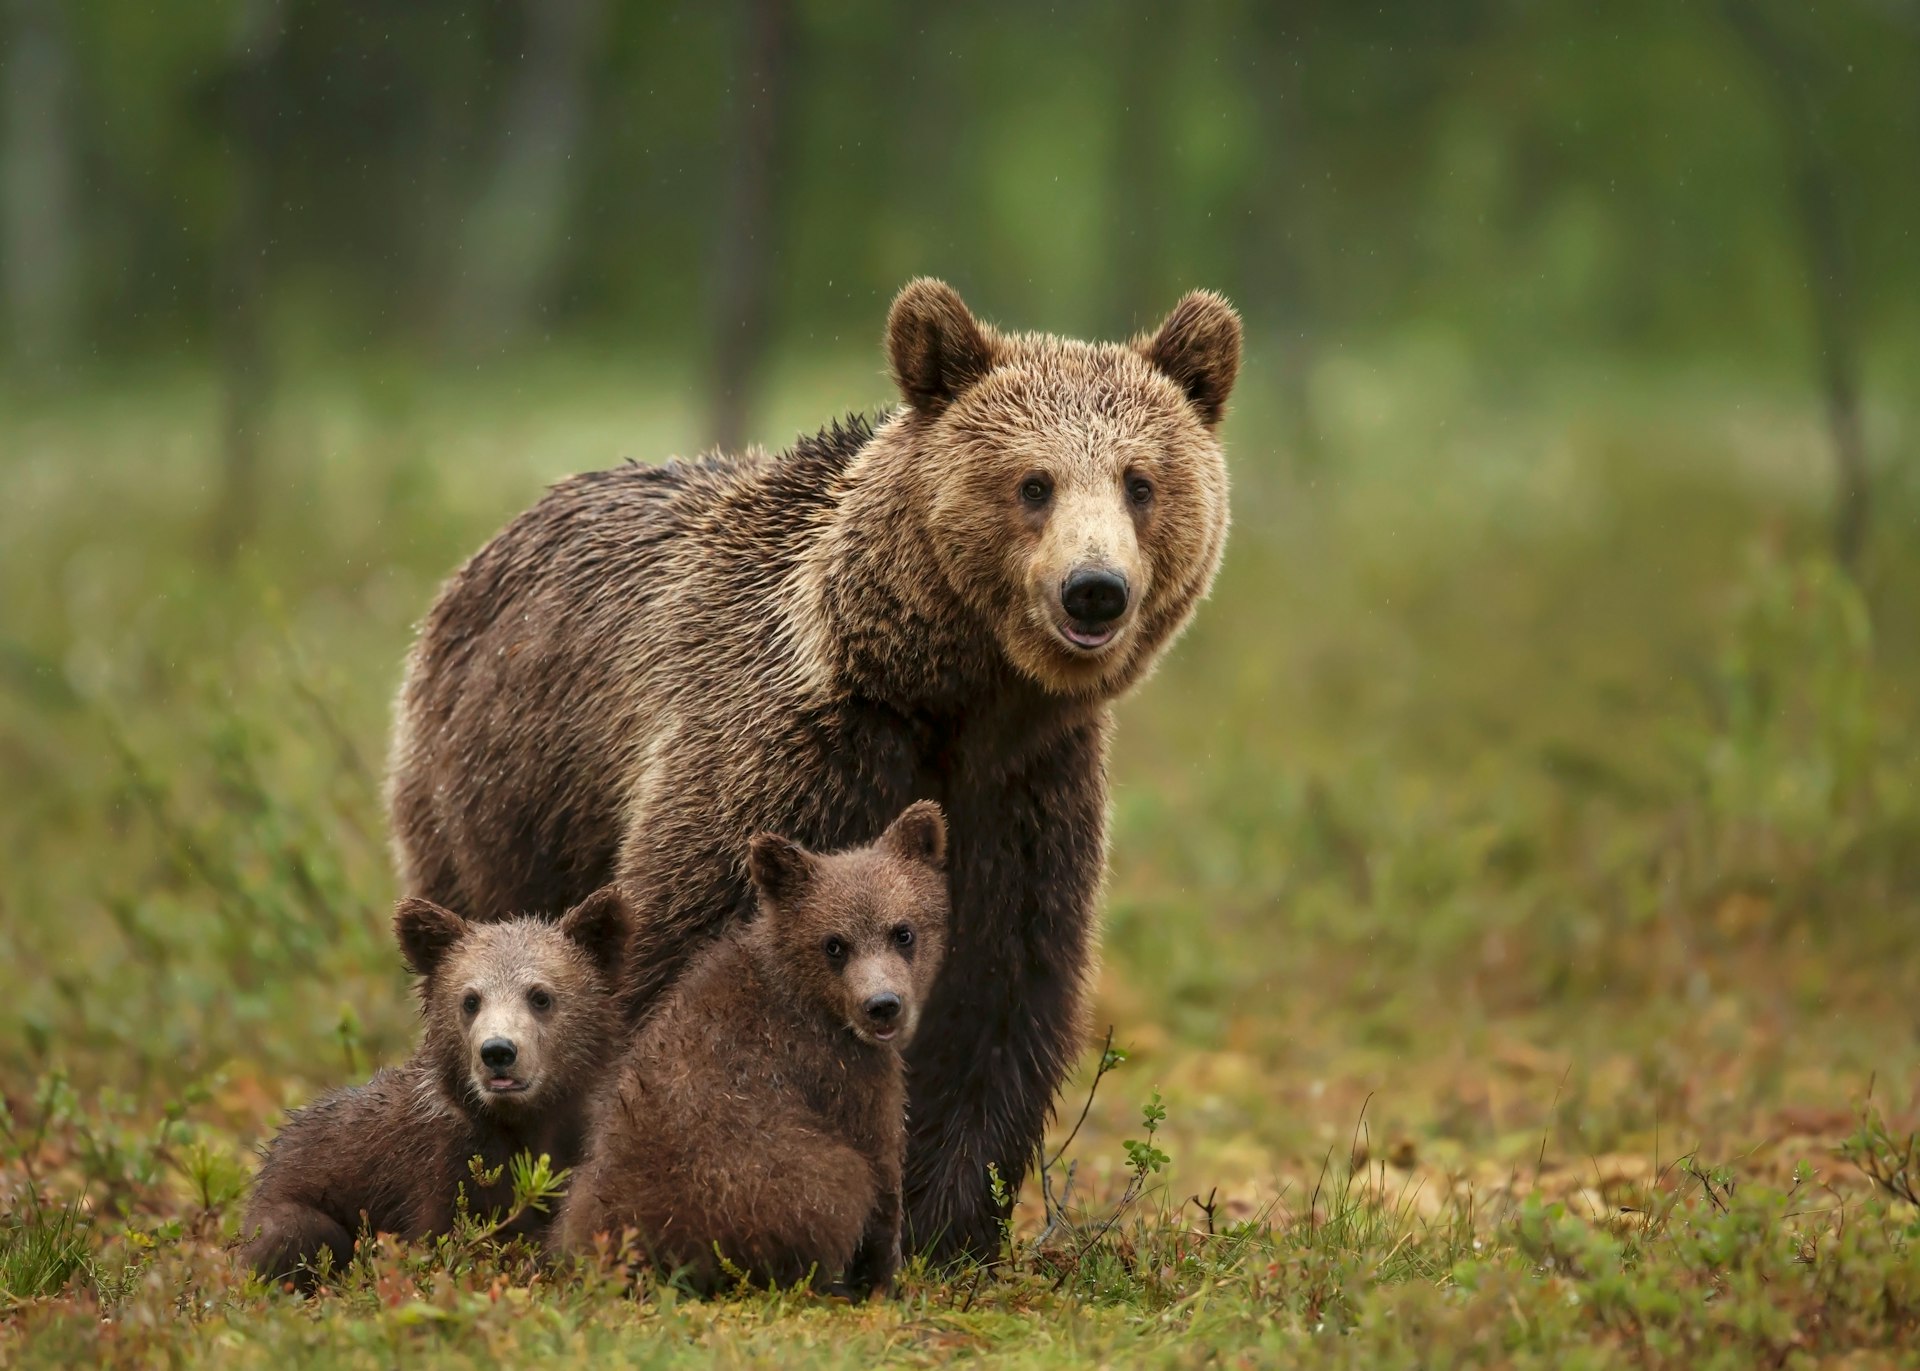 Close-up of a brown bear and her cubs in a forest